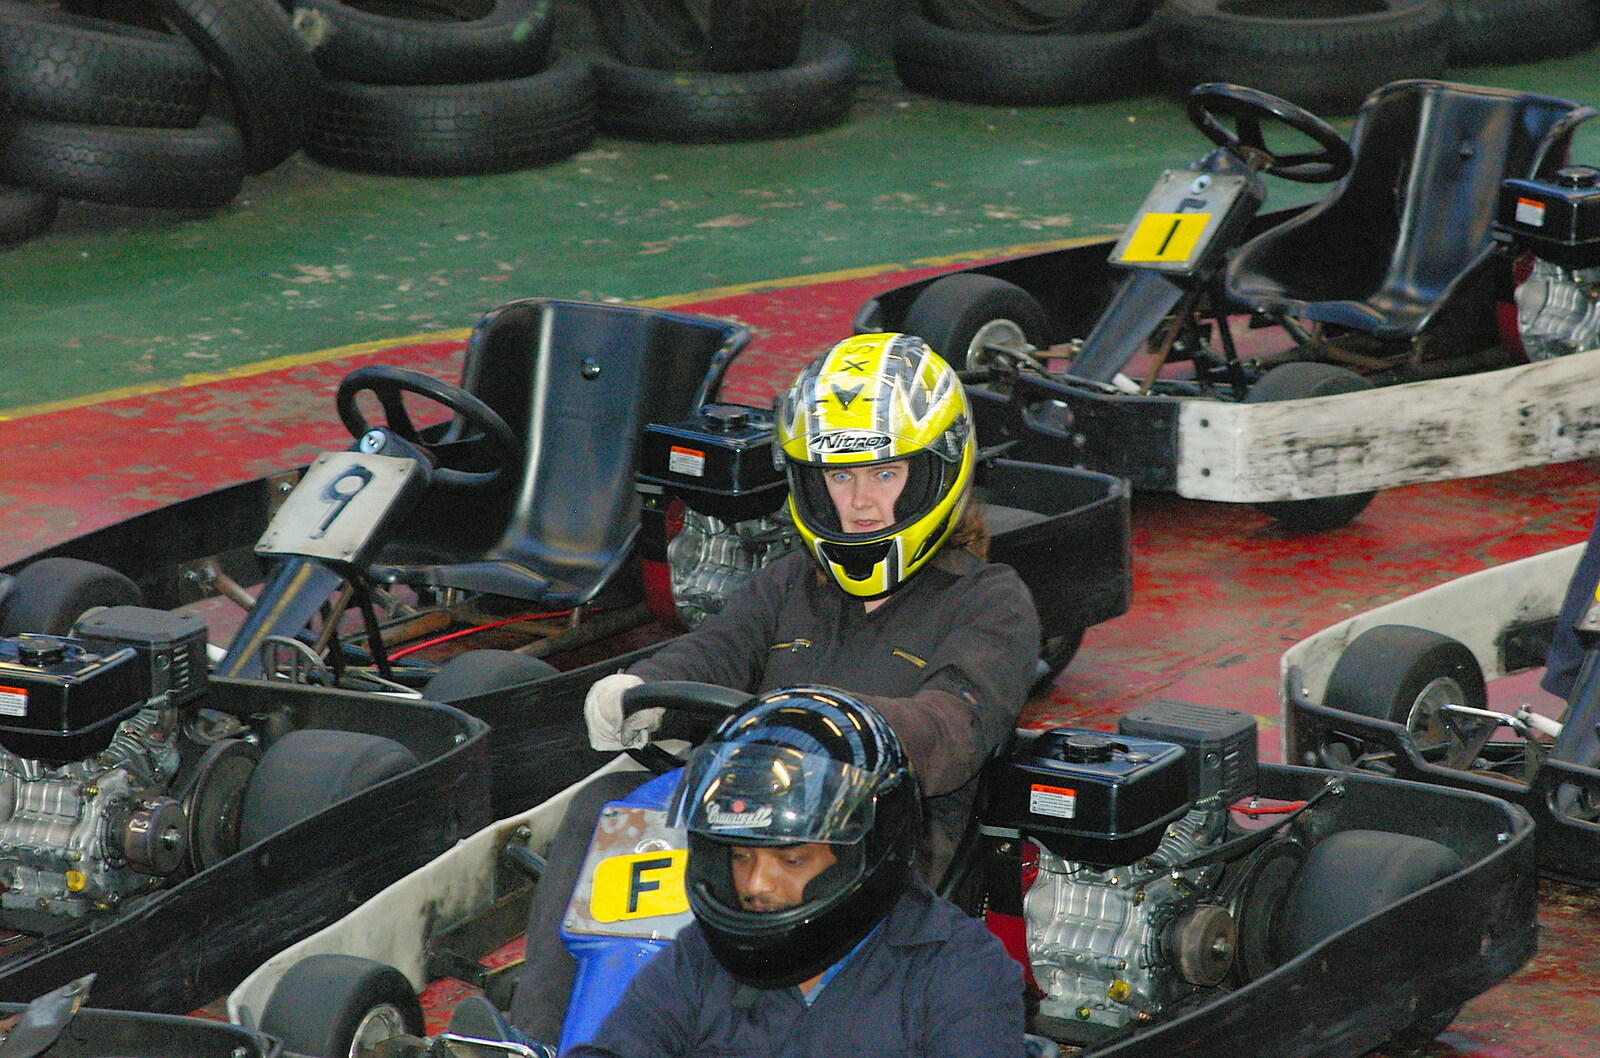 Isobel looks terrified from Qualcomm goes Karting in Caxton, Cambridgeshire - 7th November 2005